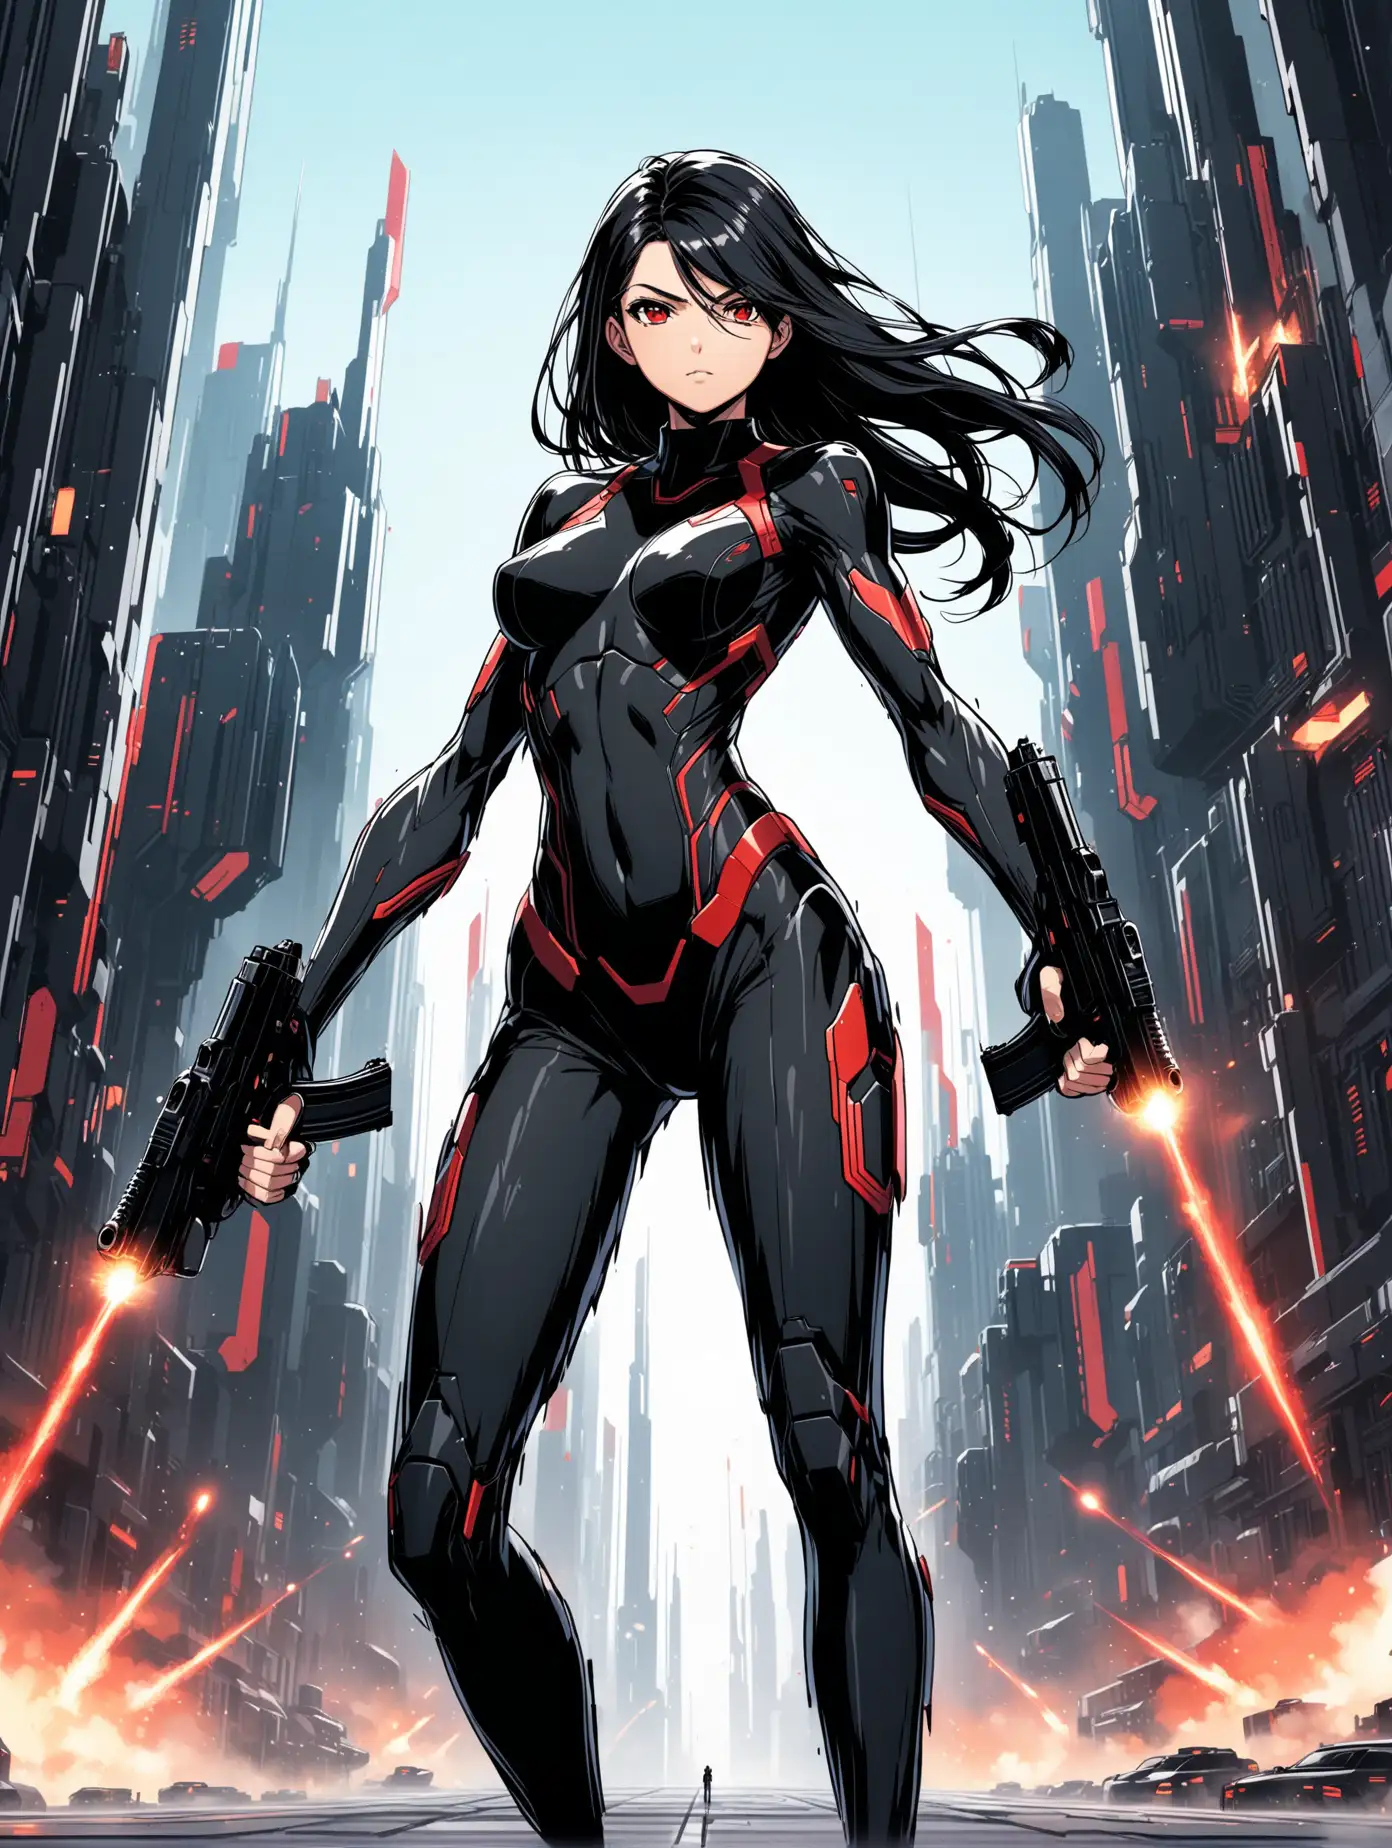 sexy fit 24 year old hero girl, long black hair, red eyes, firing handguns in each hand in futuristic town, super skinny, toned body, wearing a form-fitting black stealth suit, adorned with subtle black armor plating, red black white 3 color minimal design